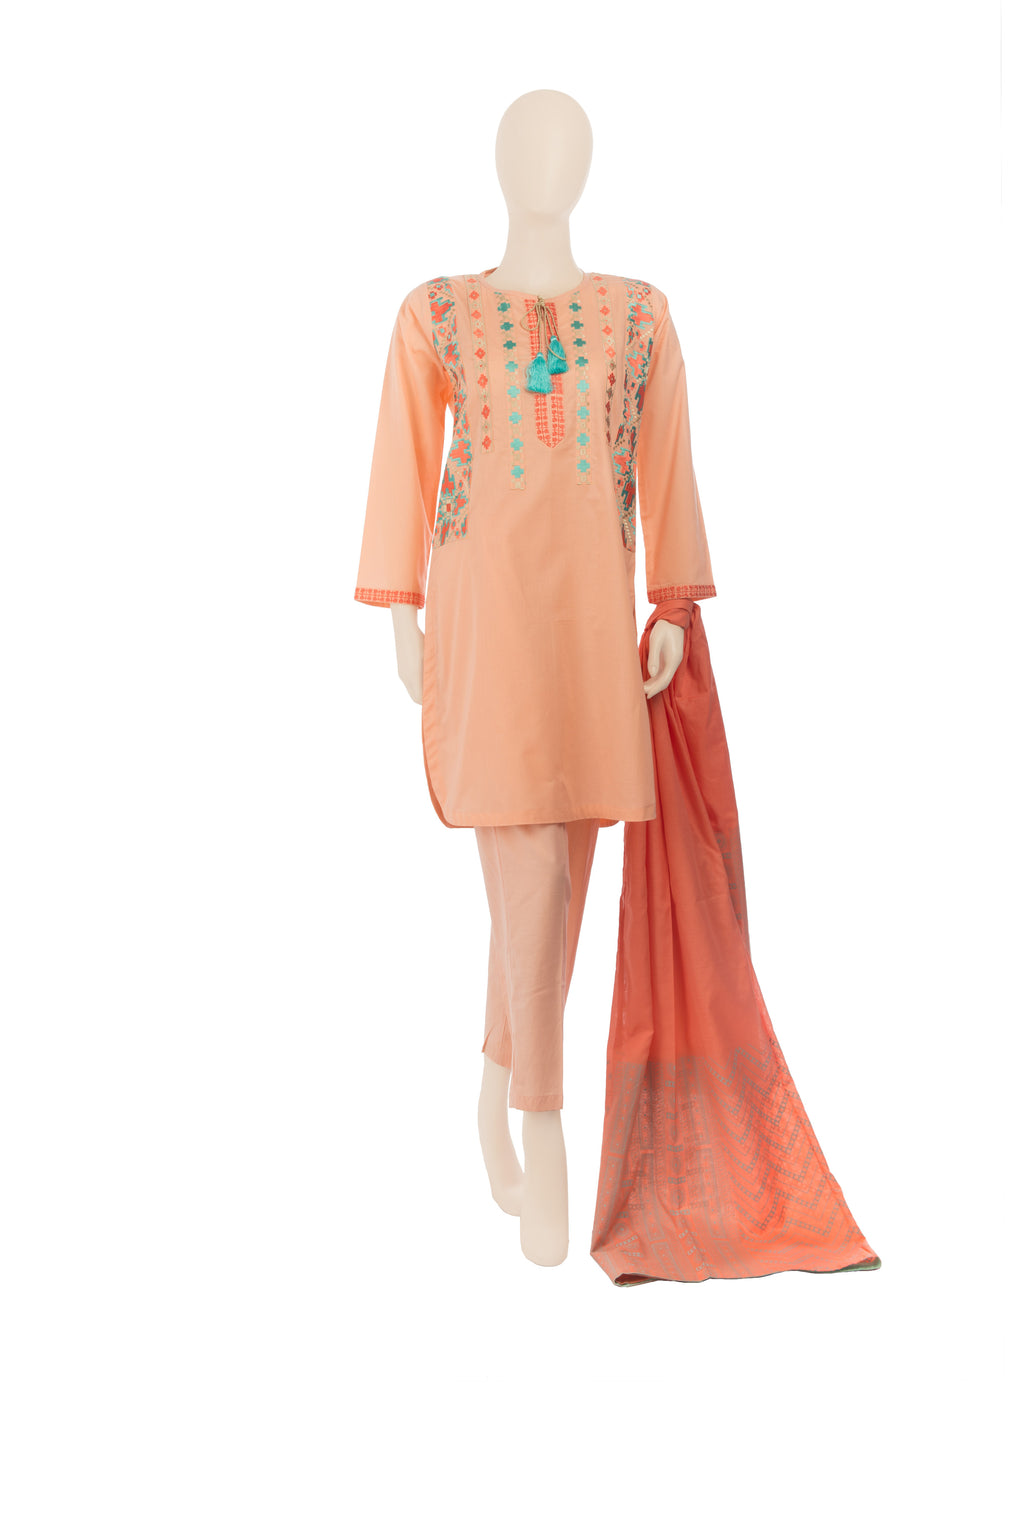 LAD-00569 Embroidered 3PC Suit - Komal's